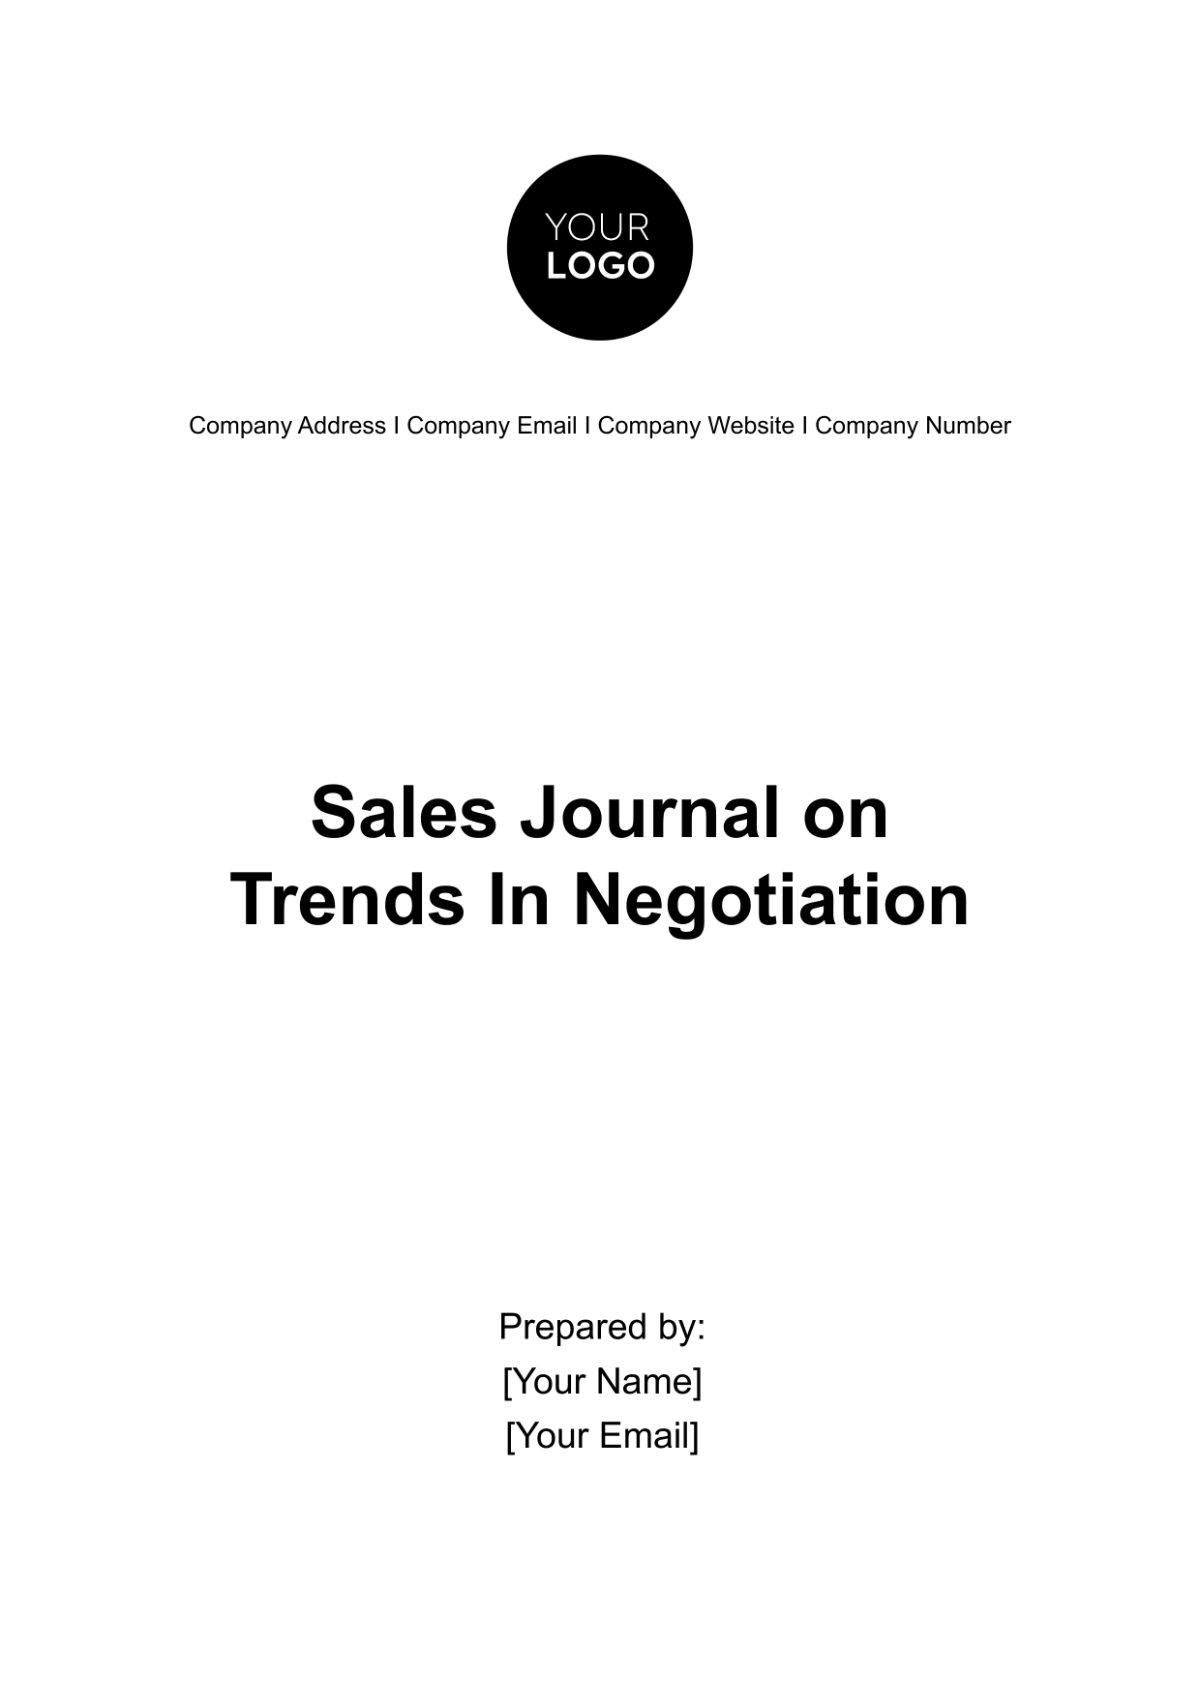 Free Sales Journal on Trends in Negotiation Template